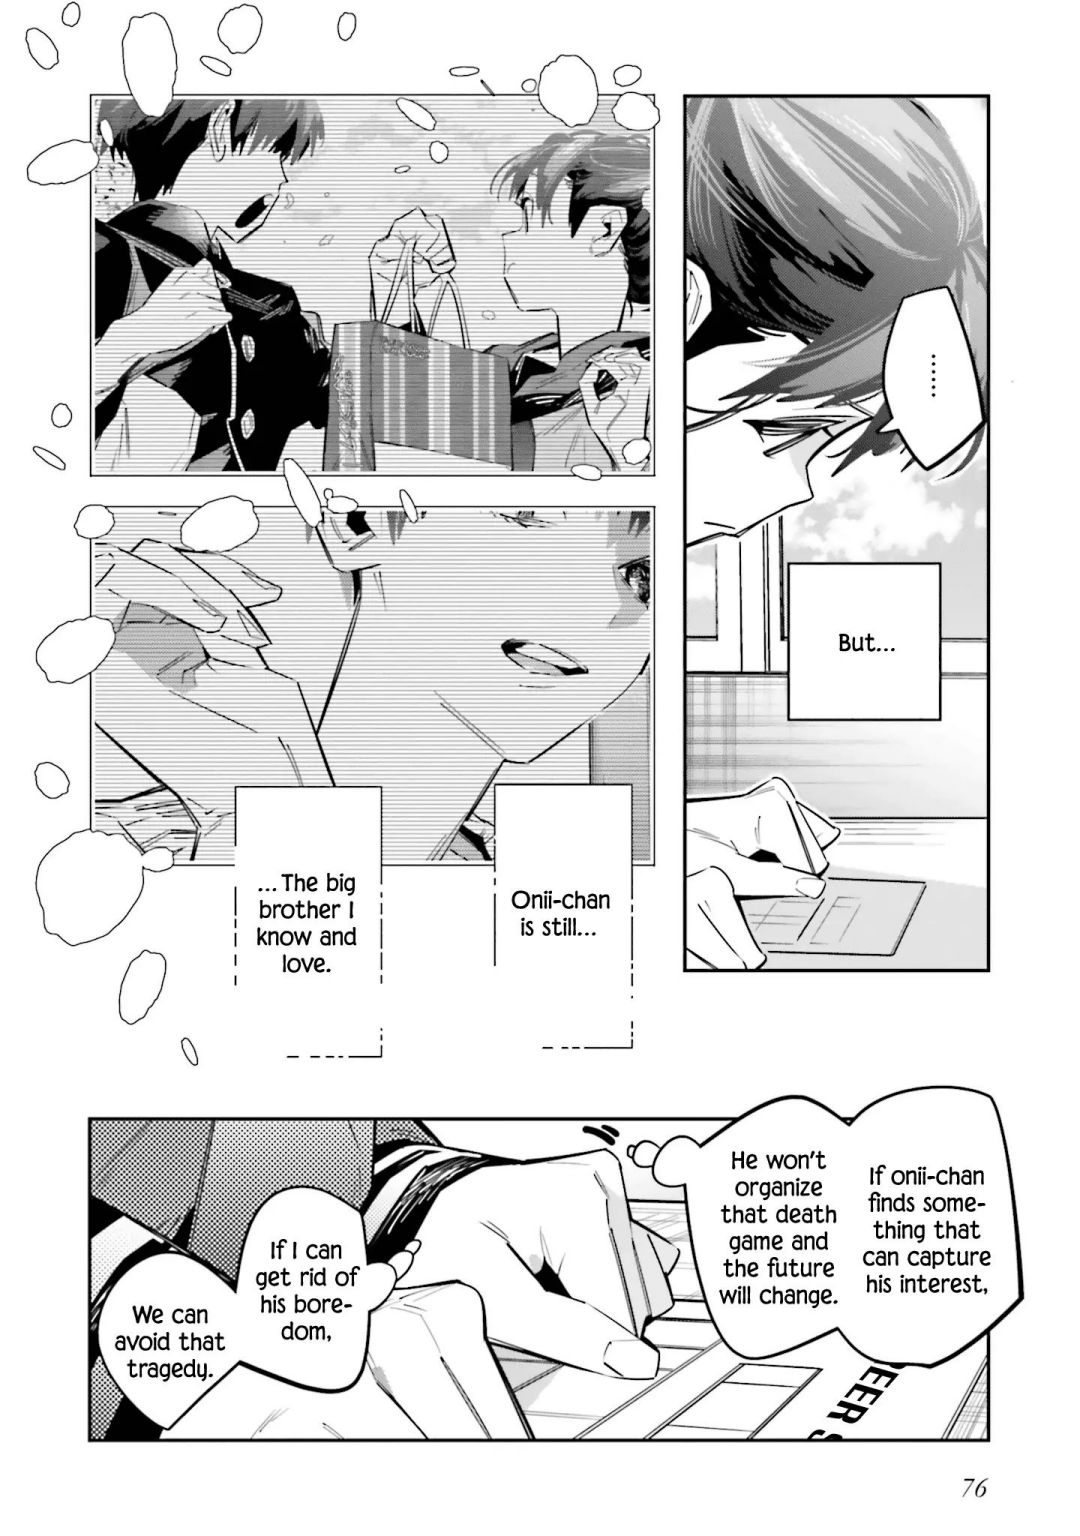 I Reincarnated As The Little Sister Of A Death Game Manga’S Murd3R Mastermind And Failed - chapter 7 - #6